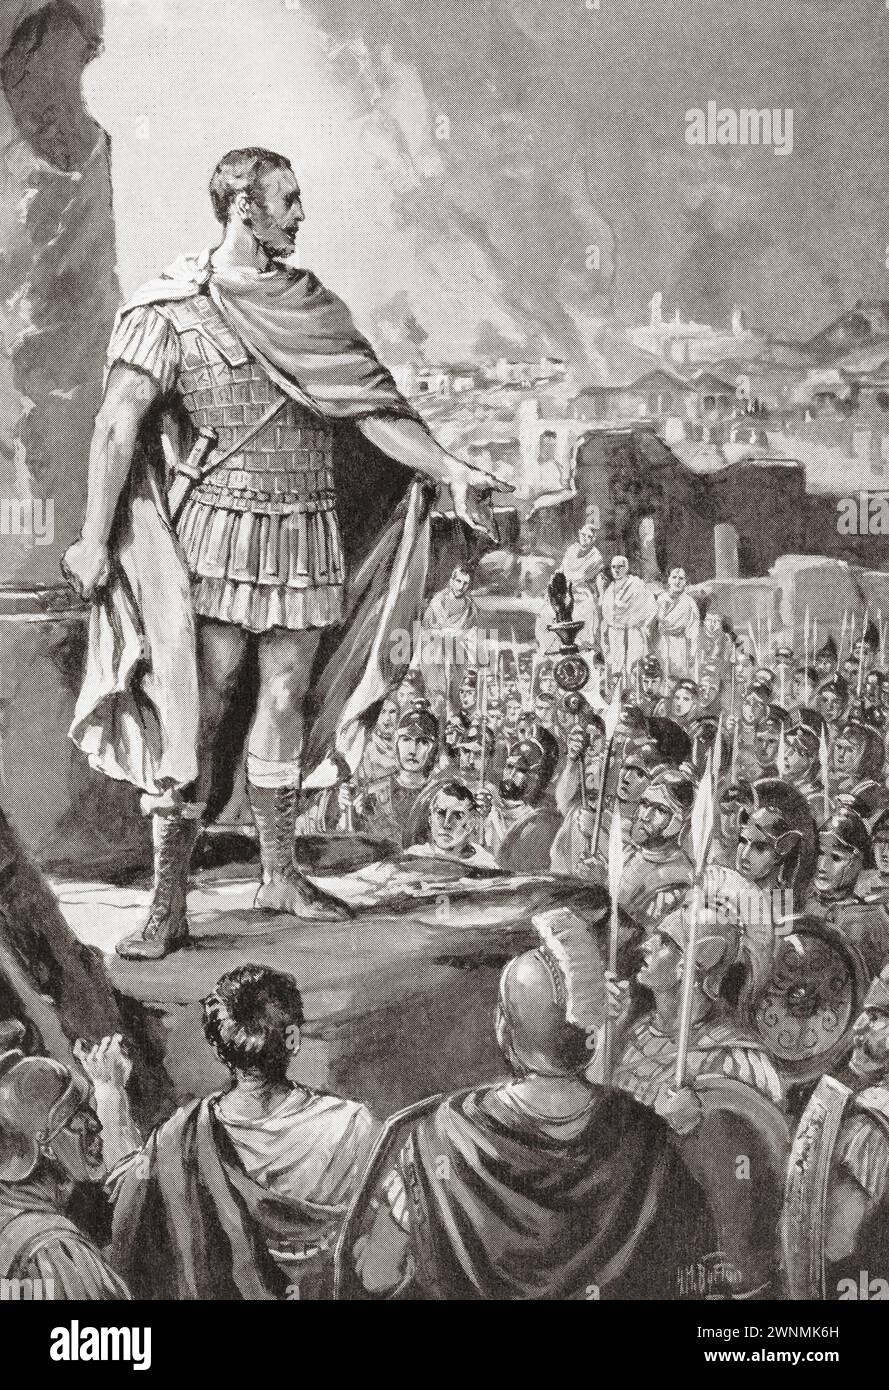 The first secessio plebis of 494 B.C. in ancient Rome. A dispute between the patrician ruling class and the plebeian underclass sparked by discontent about the burden of debt on the poorer plebeian class. Stock Photo